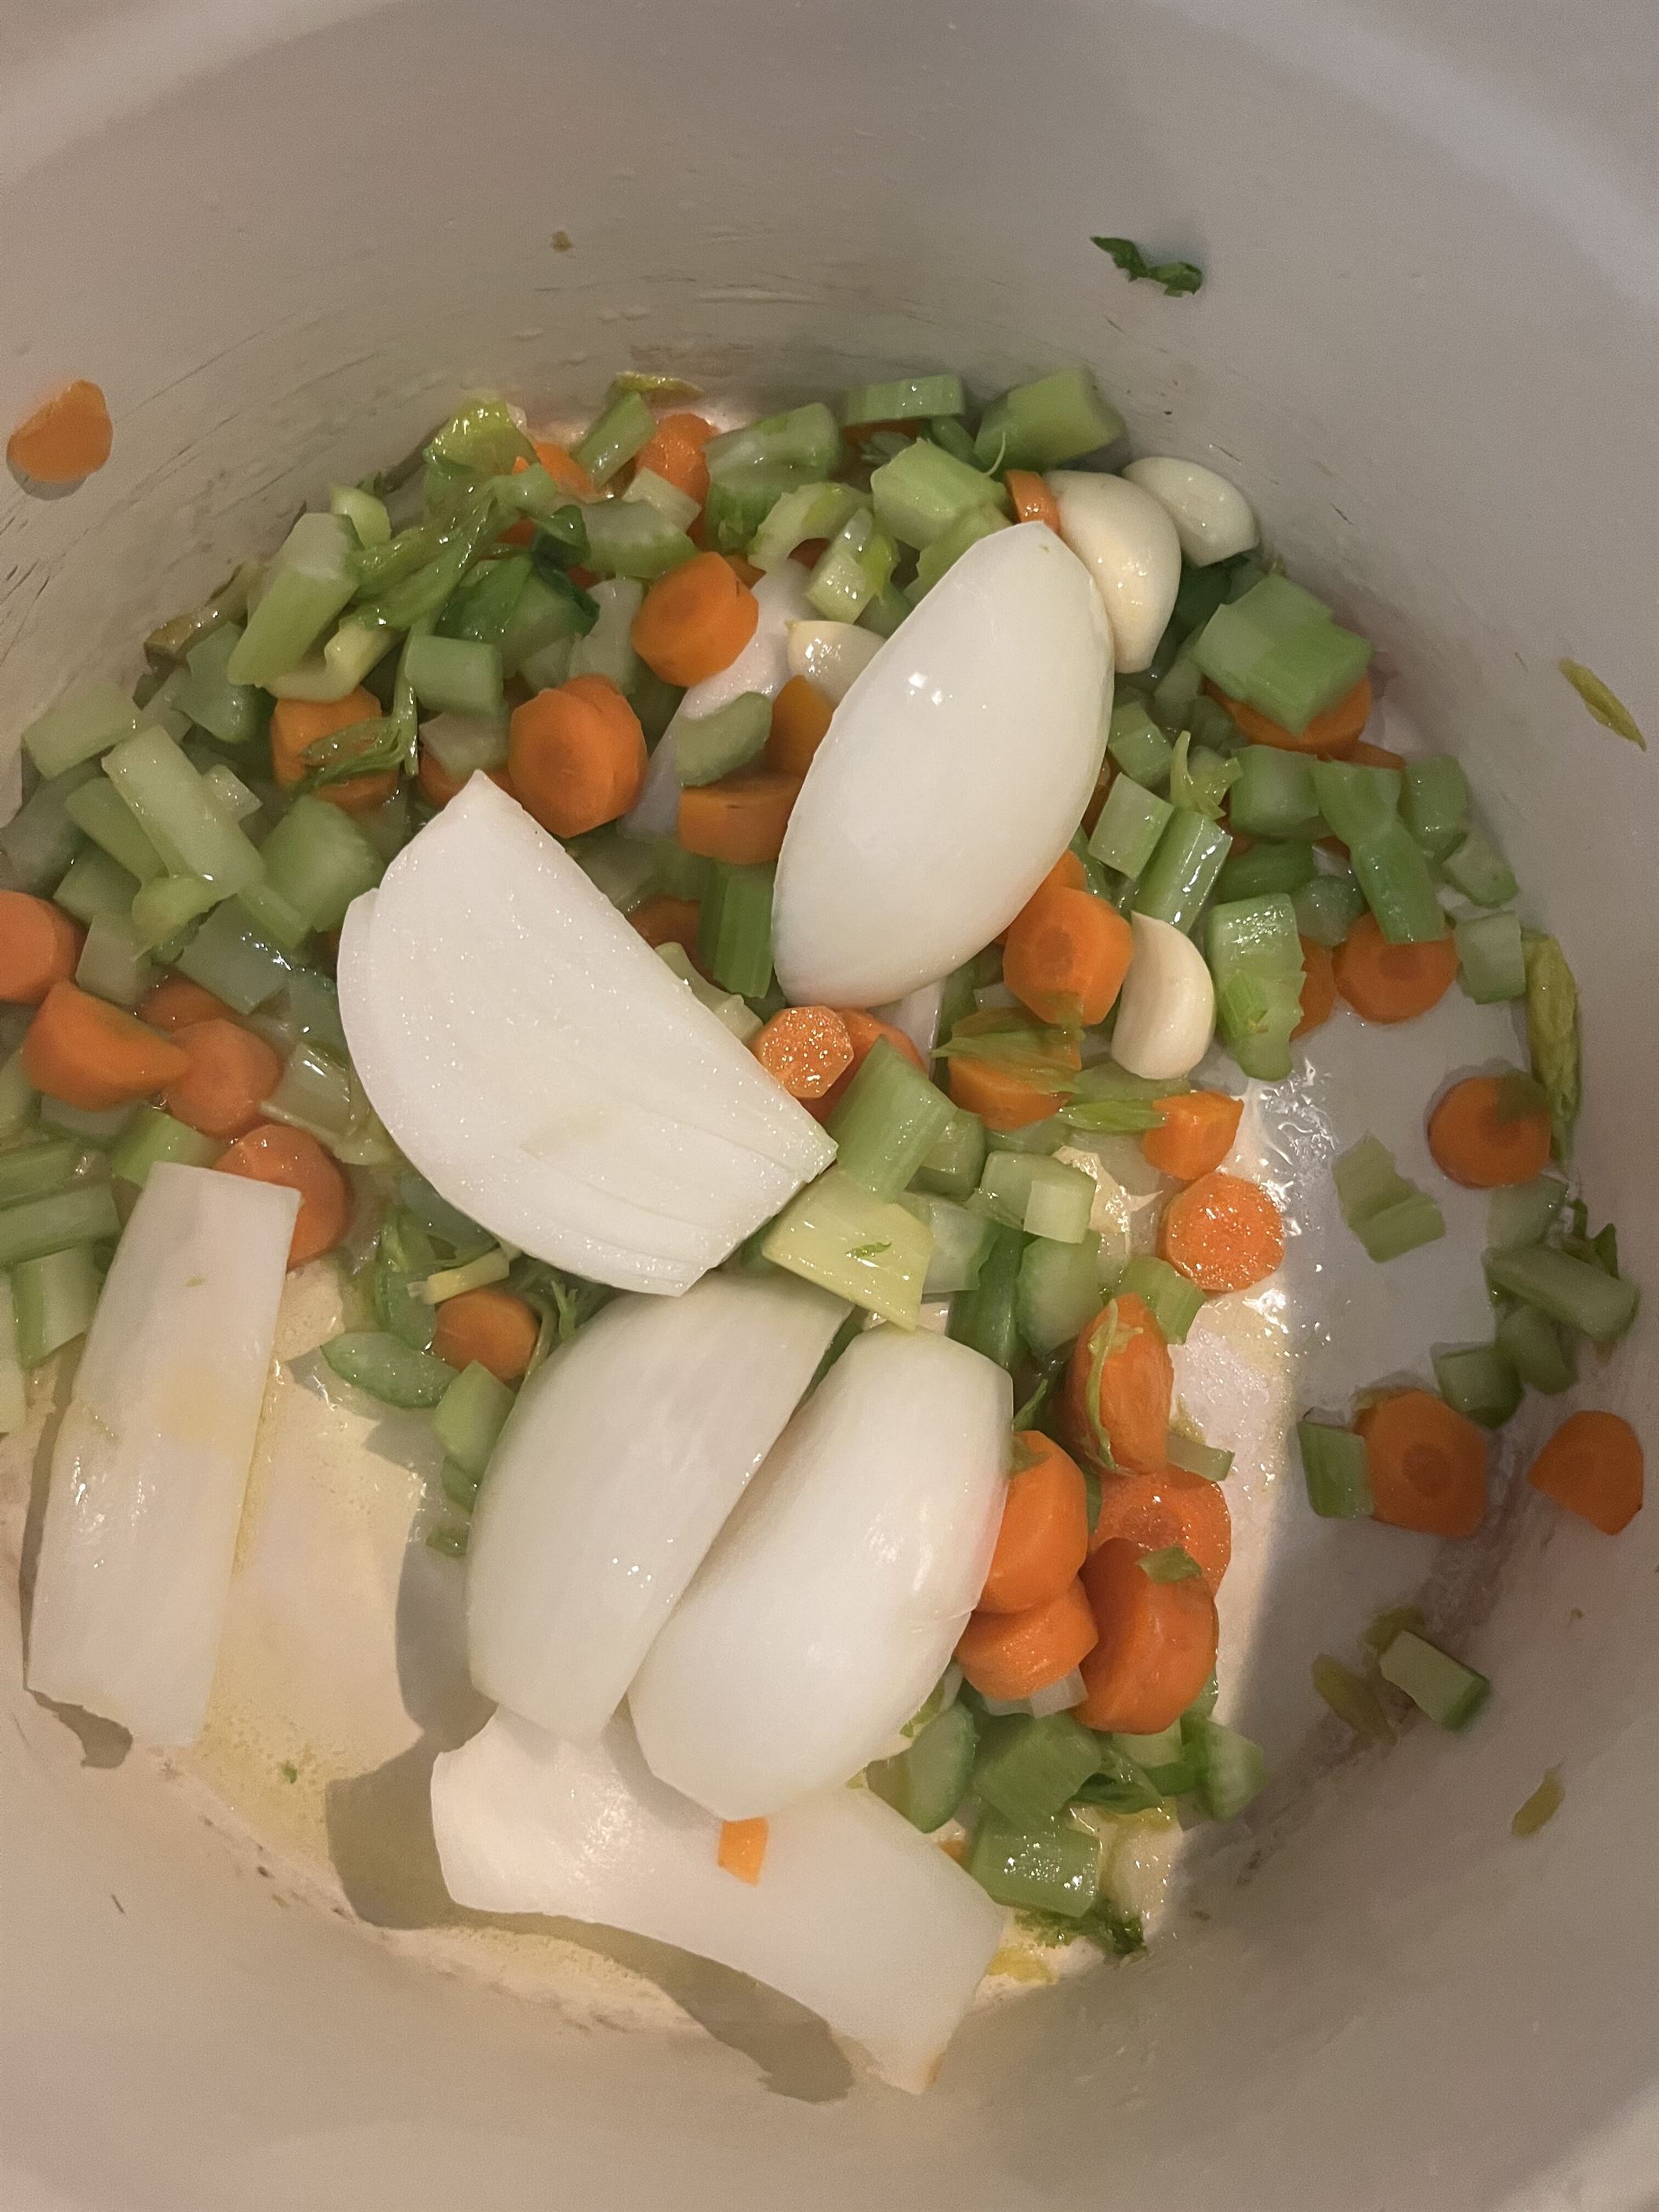 Saute the carrots, celery, onions and garlic first.
Courtney Lockwood | The Montclarion